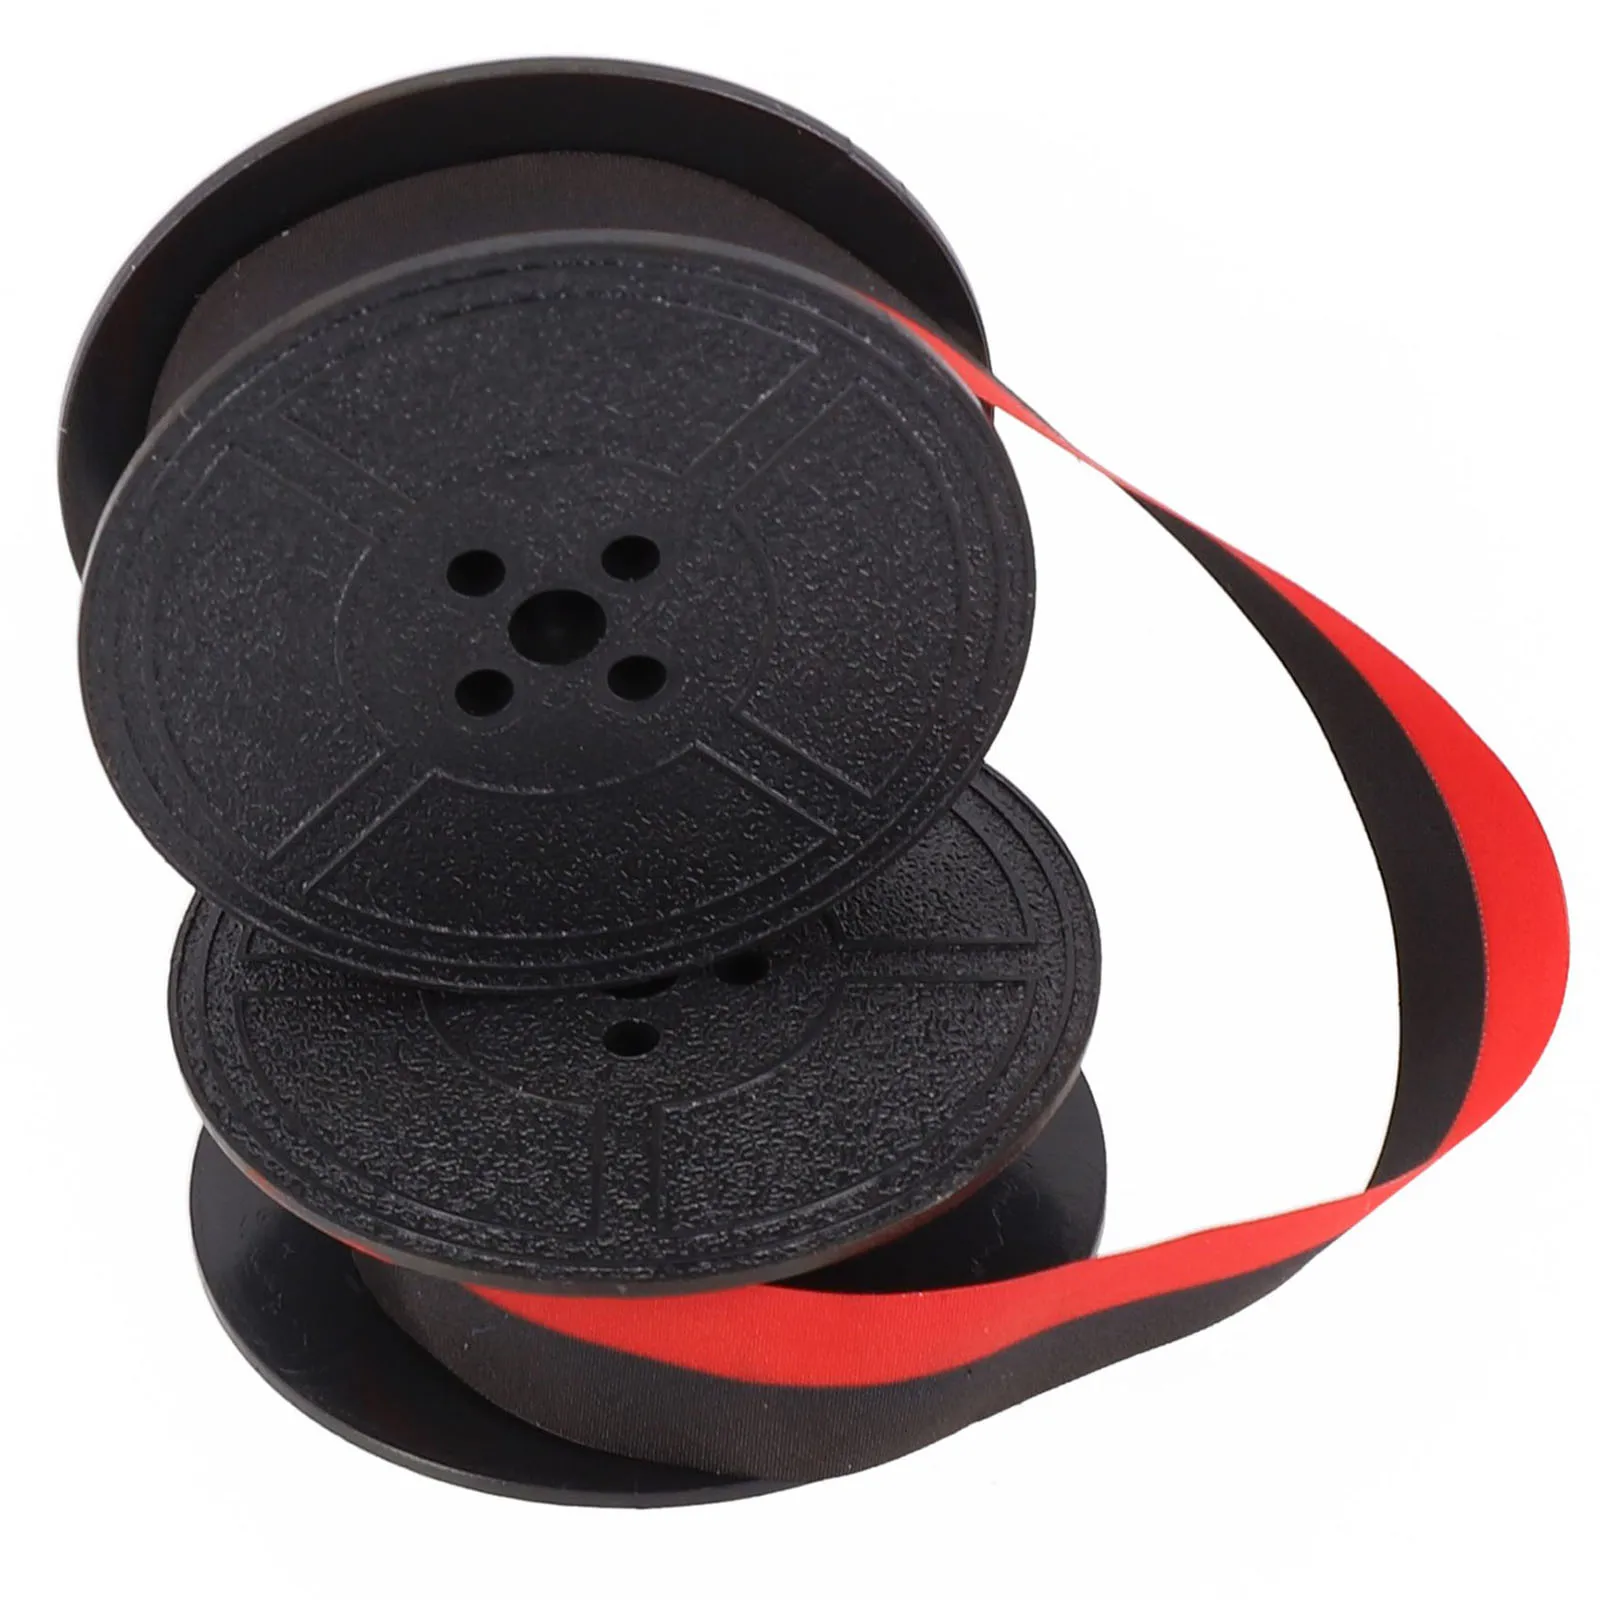 1 Sets Typewriter Ink Ribbon Portable Typewriter Ribbons Red Black Double Circle Calculator NylonRibbon Typewriter Ribbons Parts ribbons tie black yellow medal ribbons tied with high quality unisex gymnastics special offer ribbon red curling medals